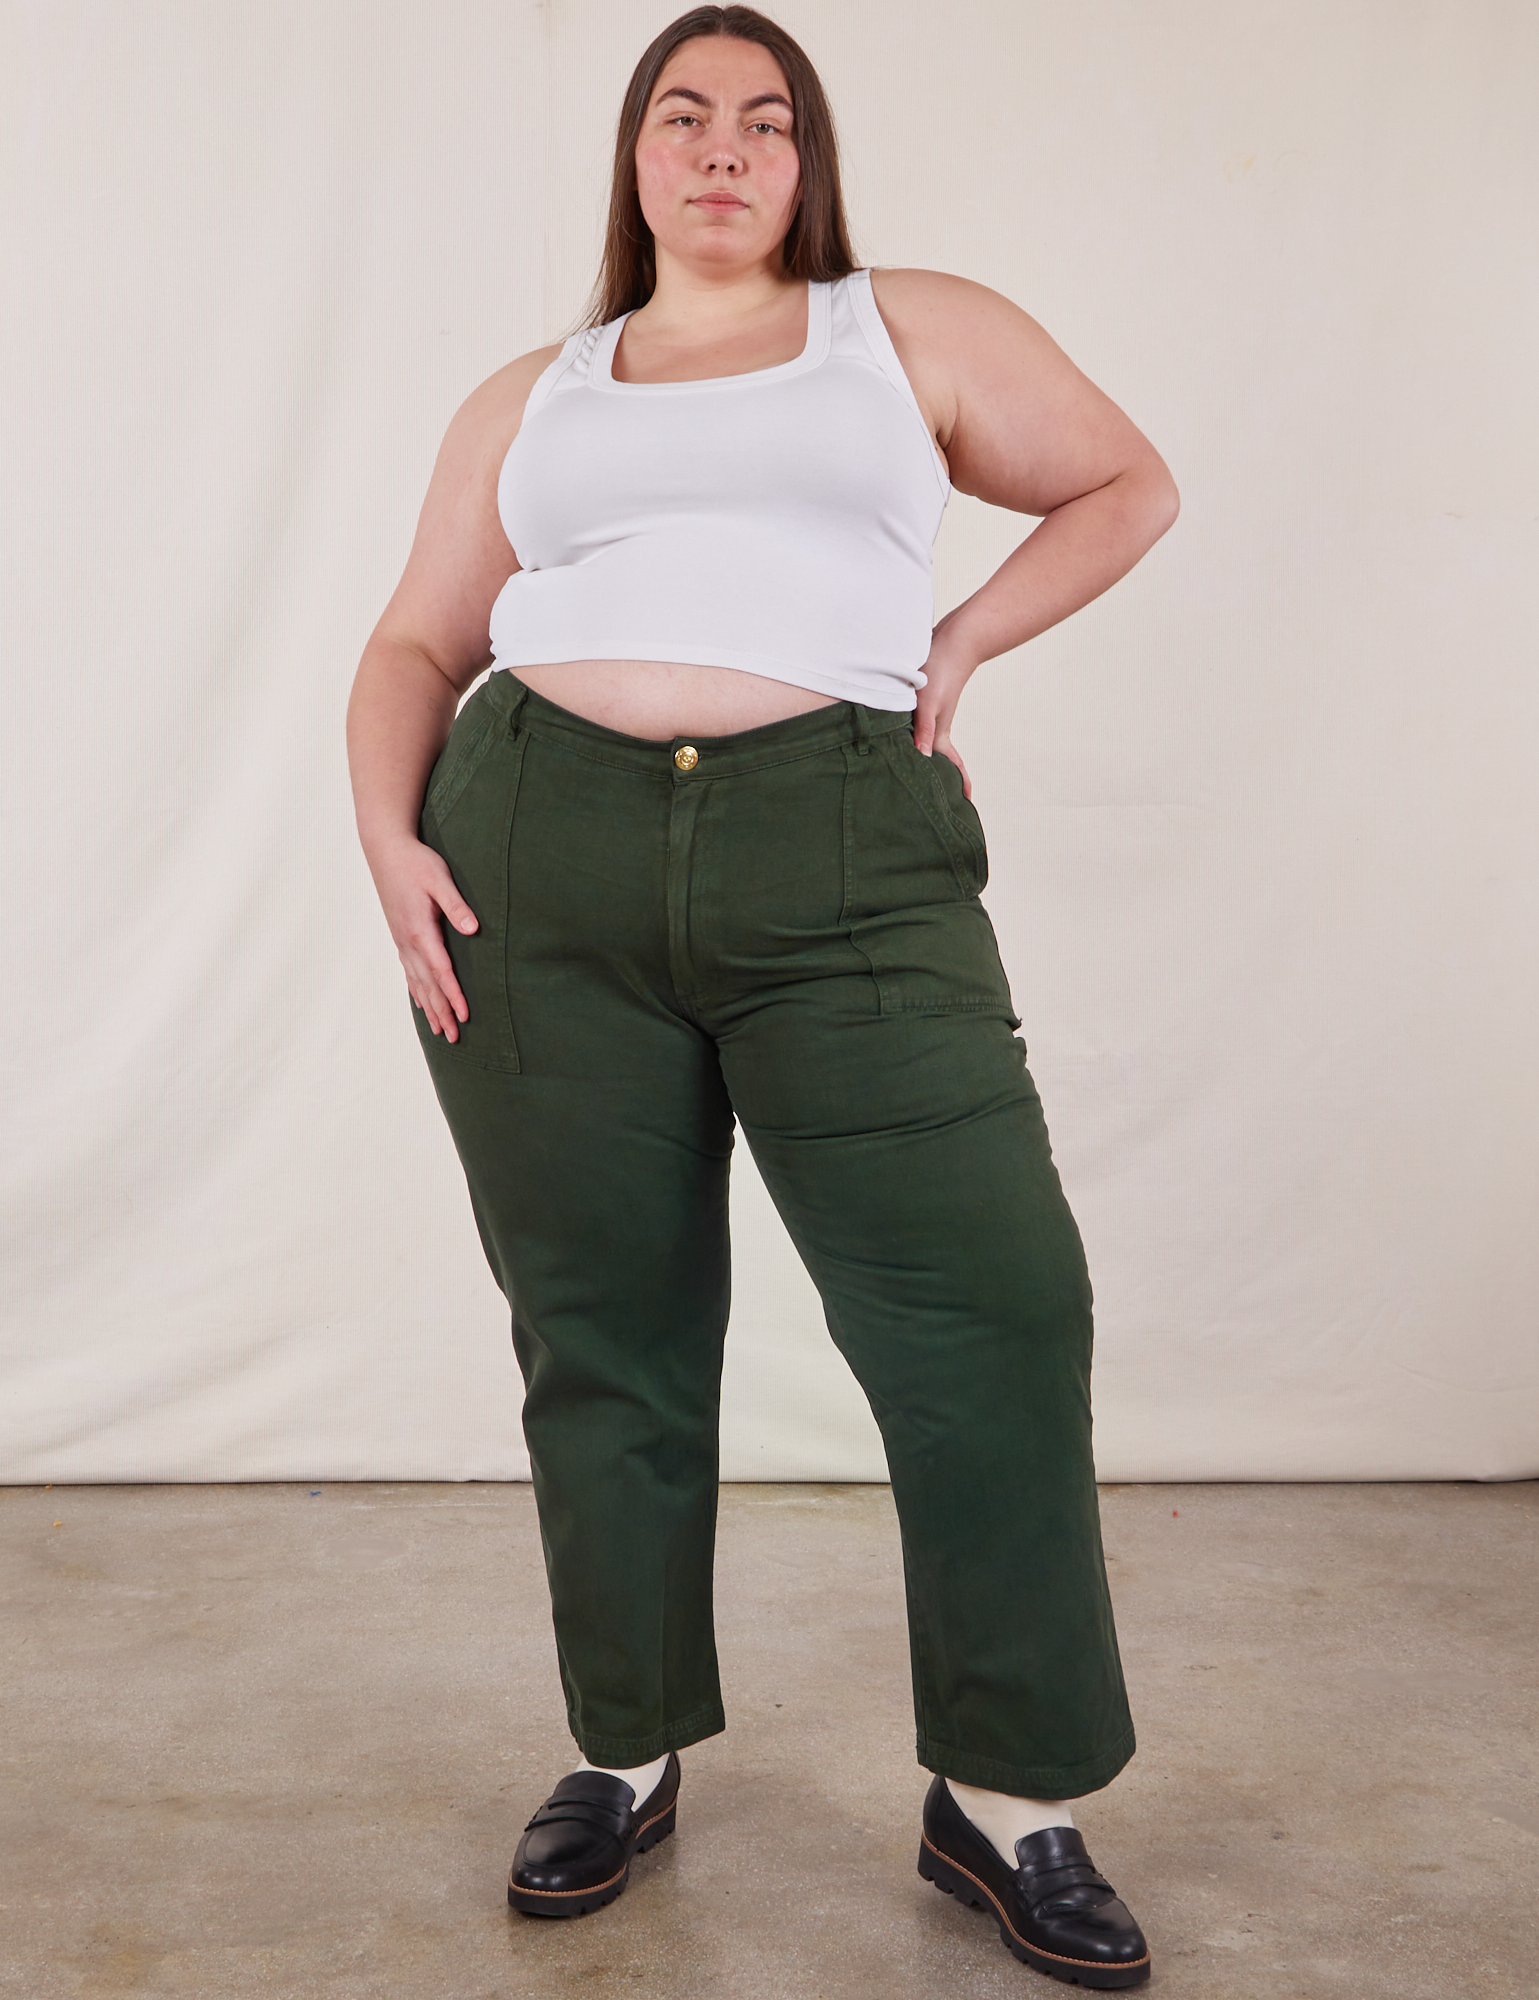 Marielena is 5&#39;8&quot; and wearing 2XL Work Pants in Swamp Green paired with Cropped Tank Top in vintage tee off-white